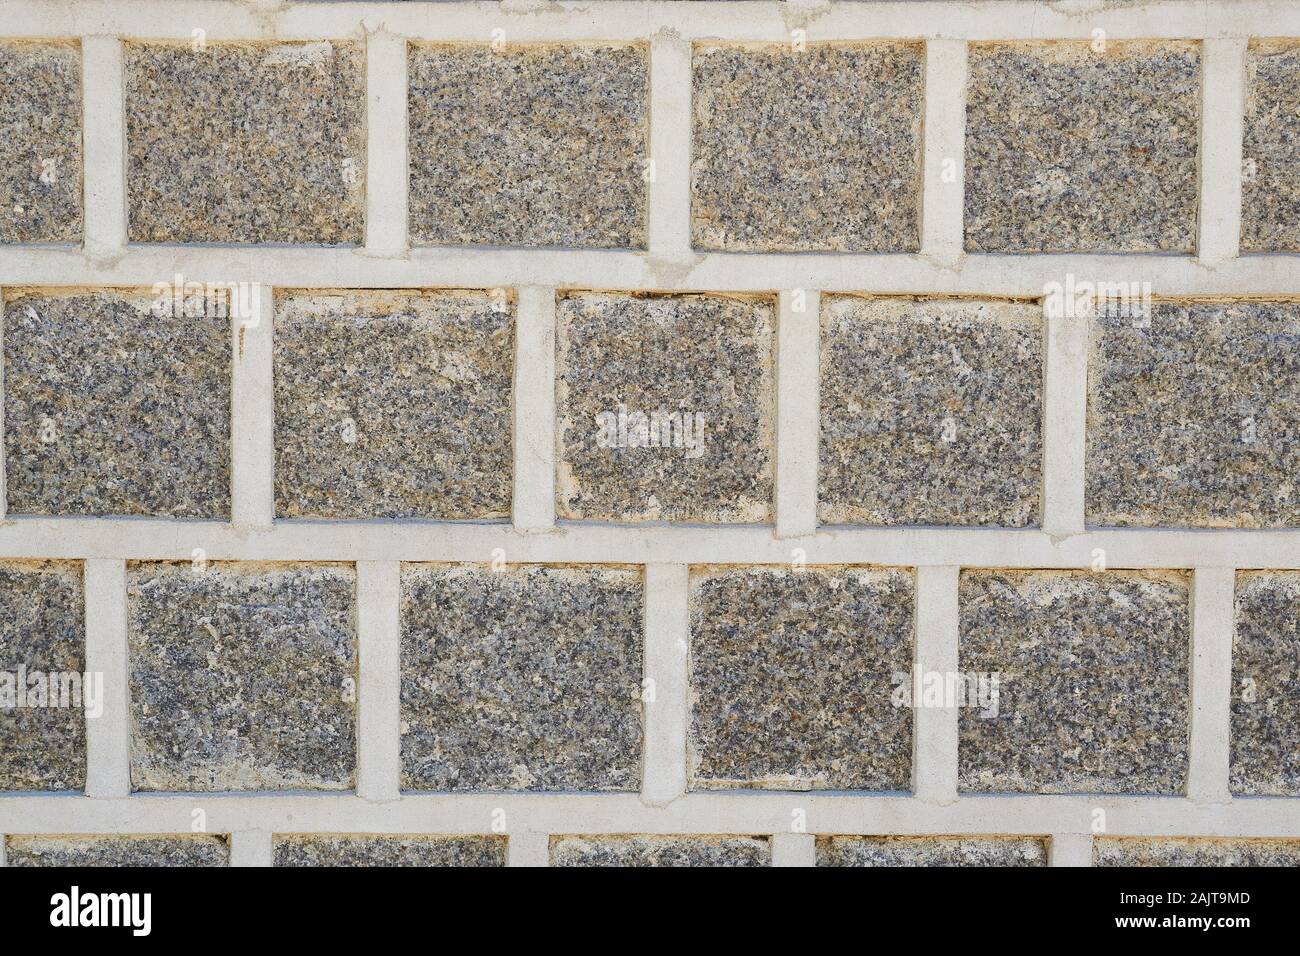 Gray stones in a simple repeating pattern on an outside wall in Gyeongbokgung Palace. Stock Photo